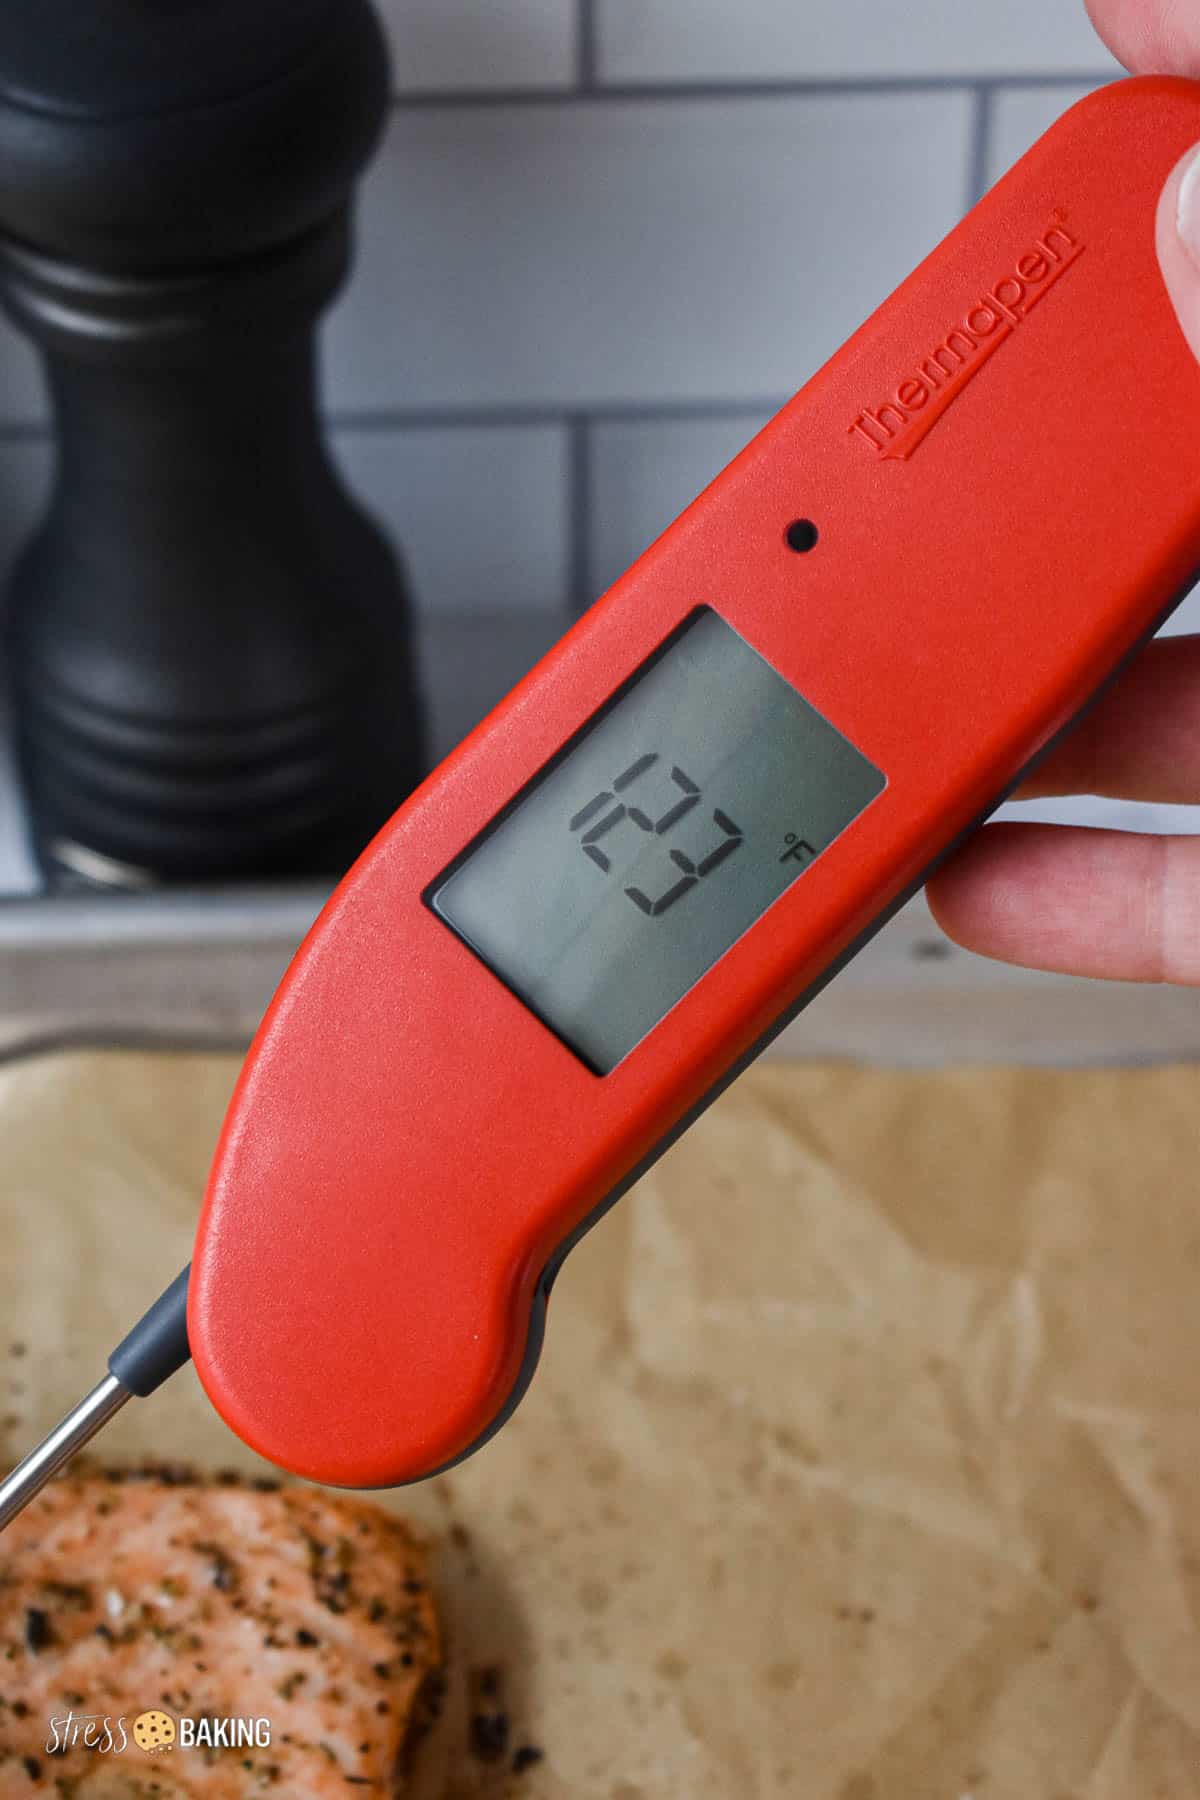 A red ThermoWorks Thermapen reading 123 degrees F